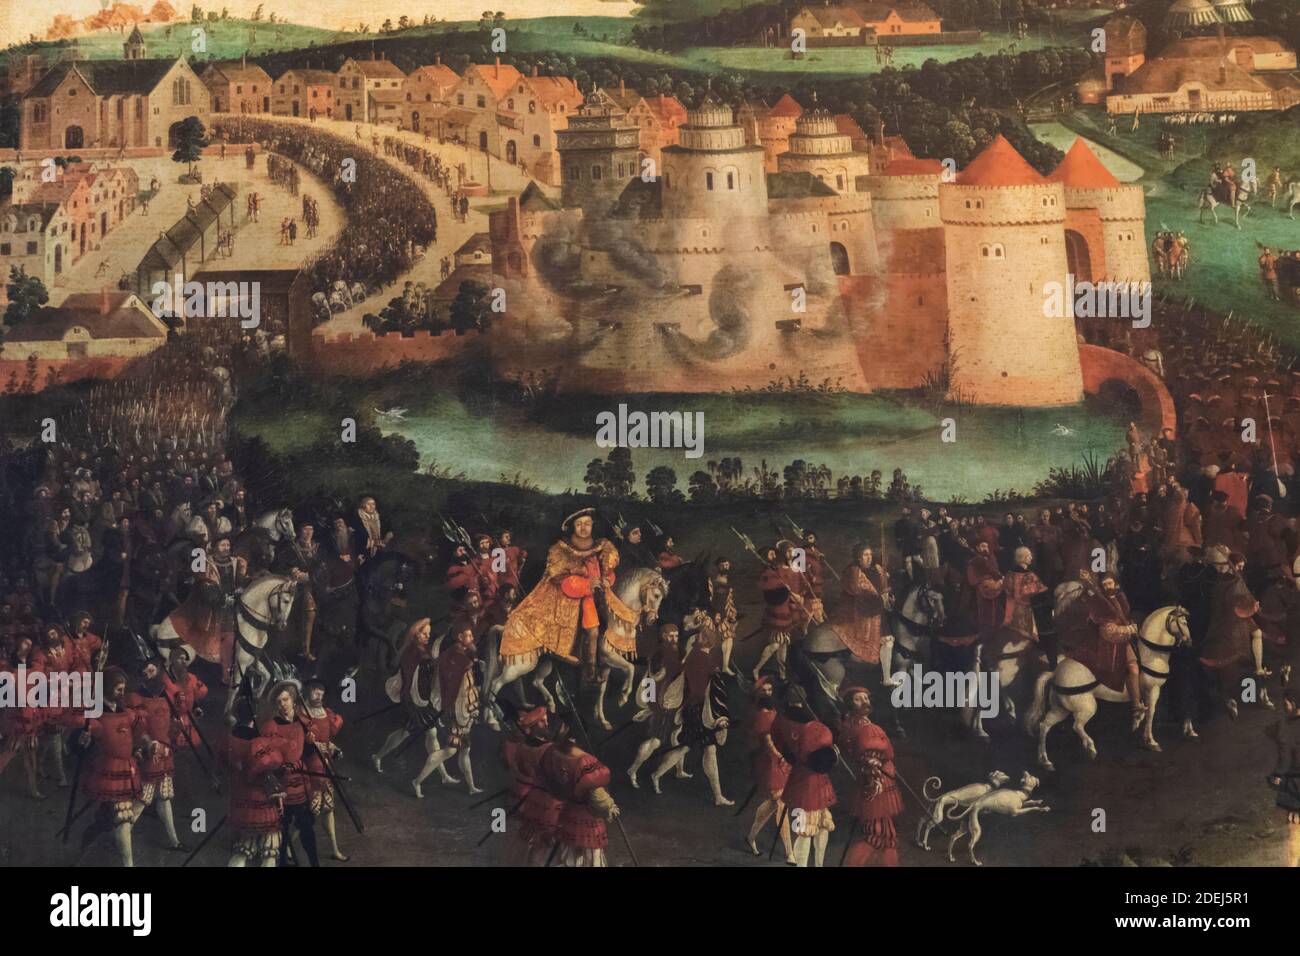 England, Kent, Leeds Castle, Painting of The Field of Cloth of Gold showing The Summit Meeting Between Henry VIII and Francis I of France in Ballinghe Stock Photo